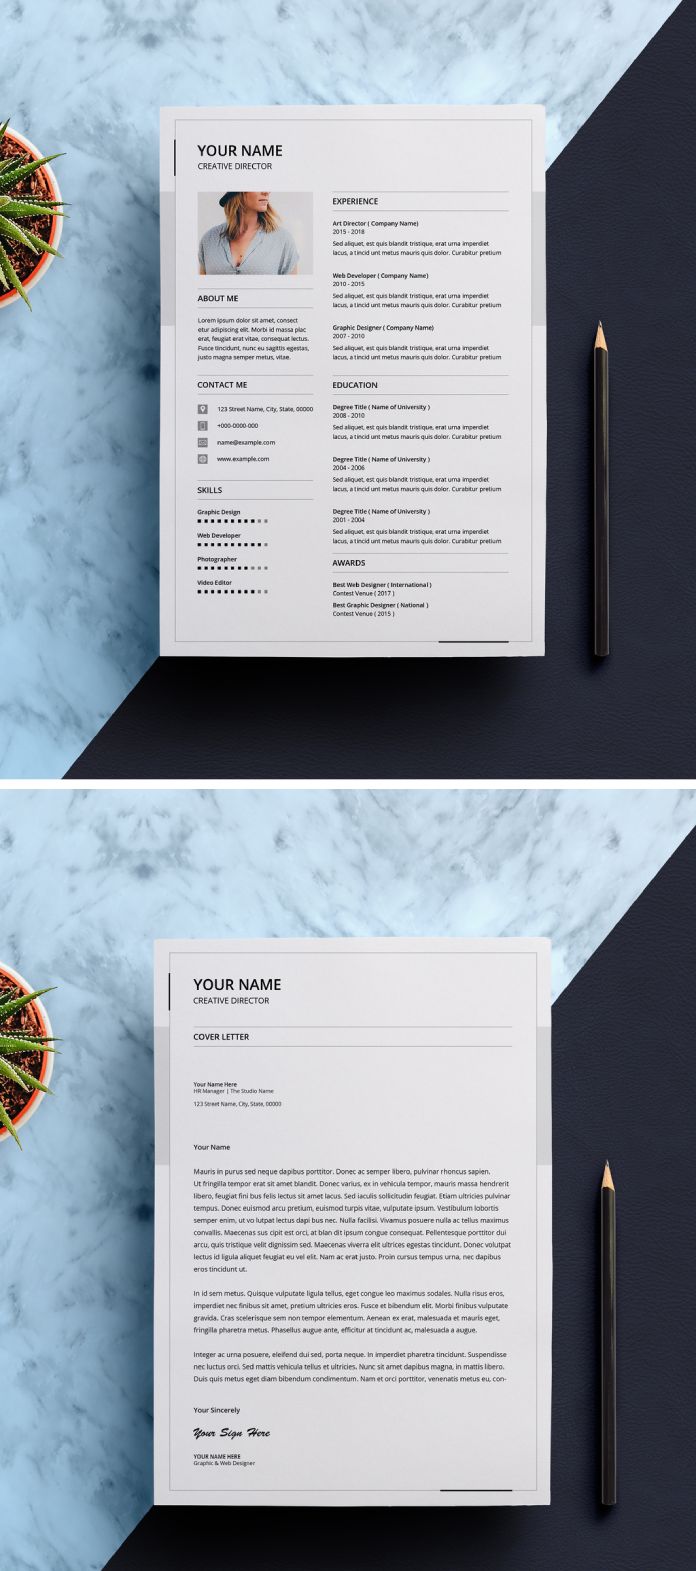 Download a Resume and Cover Letter Template for Adobe Photoshop.